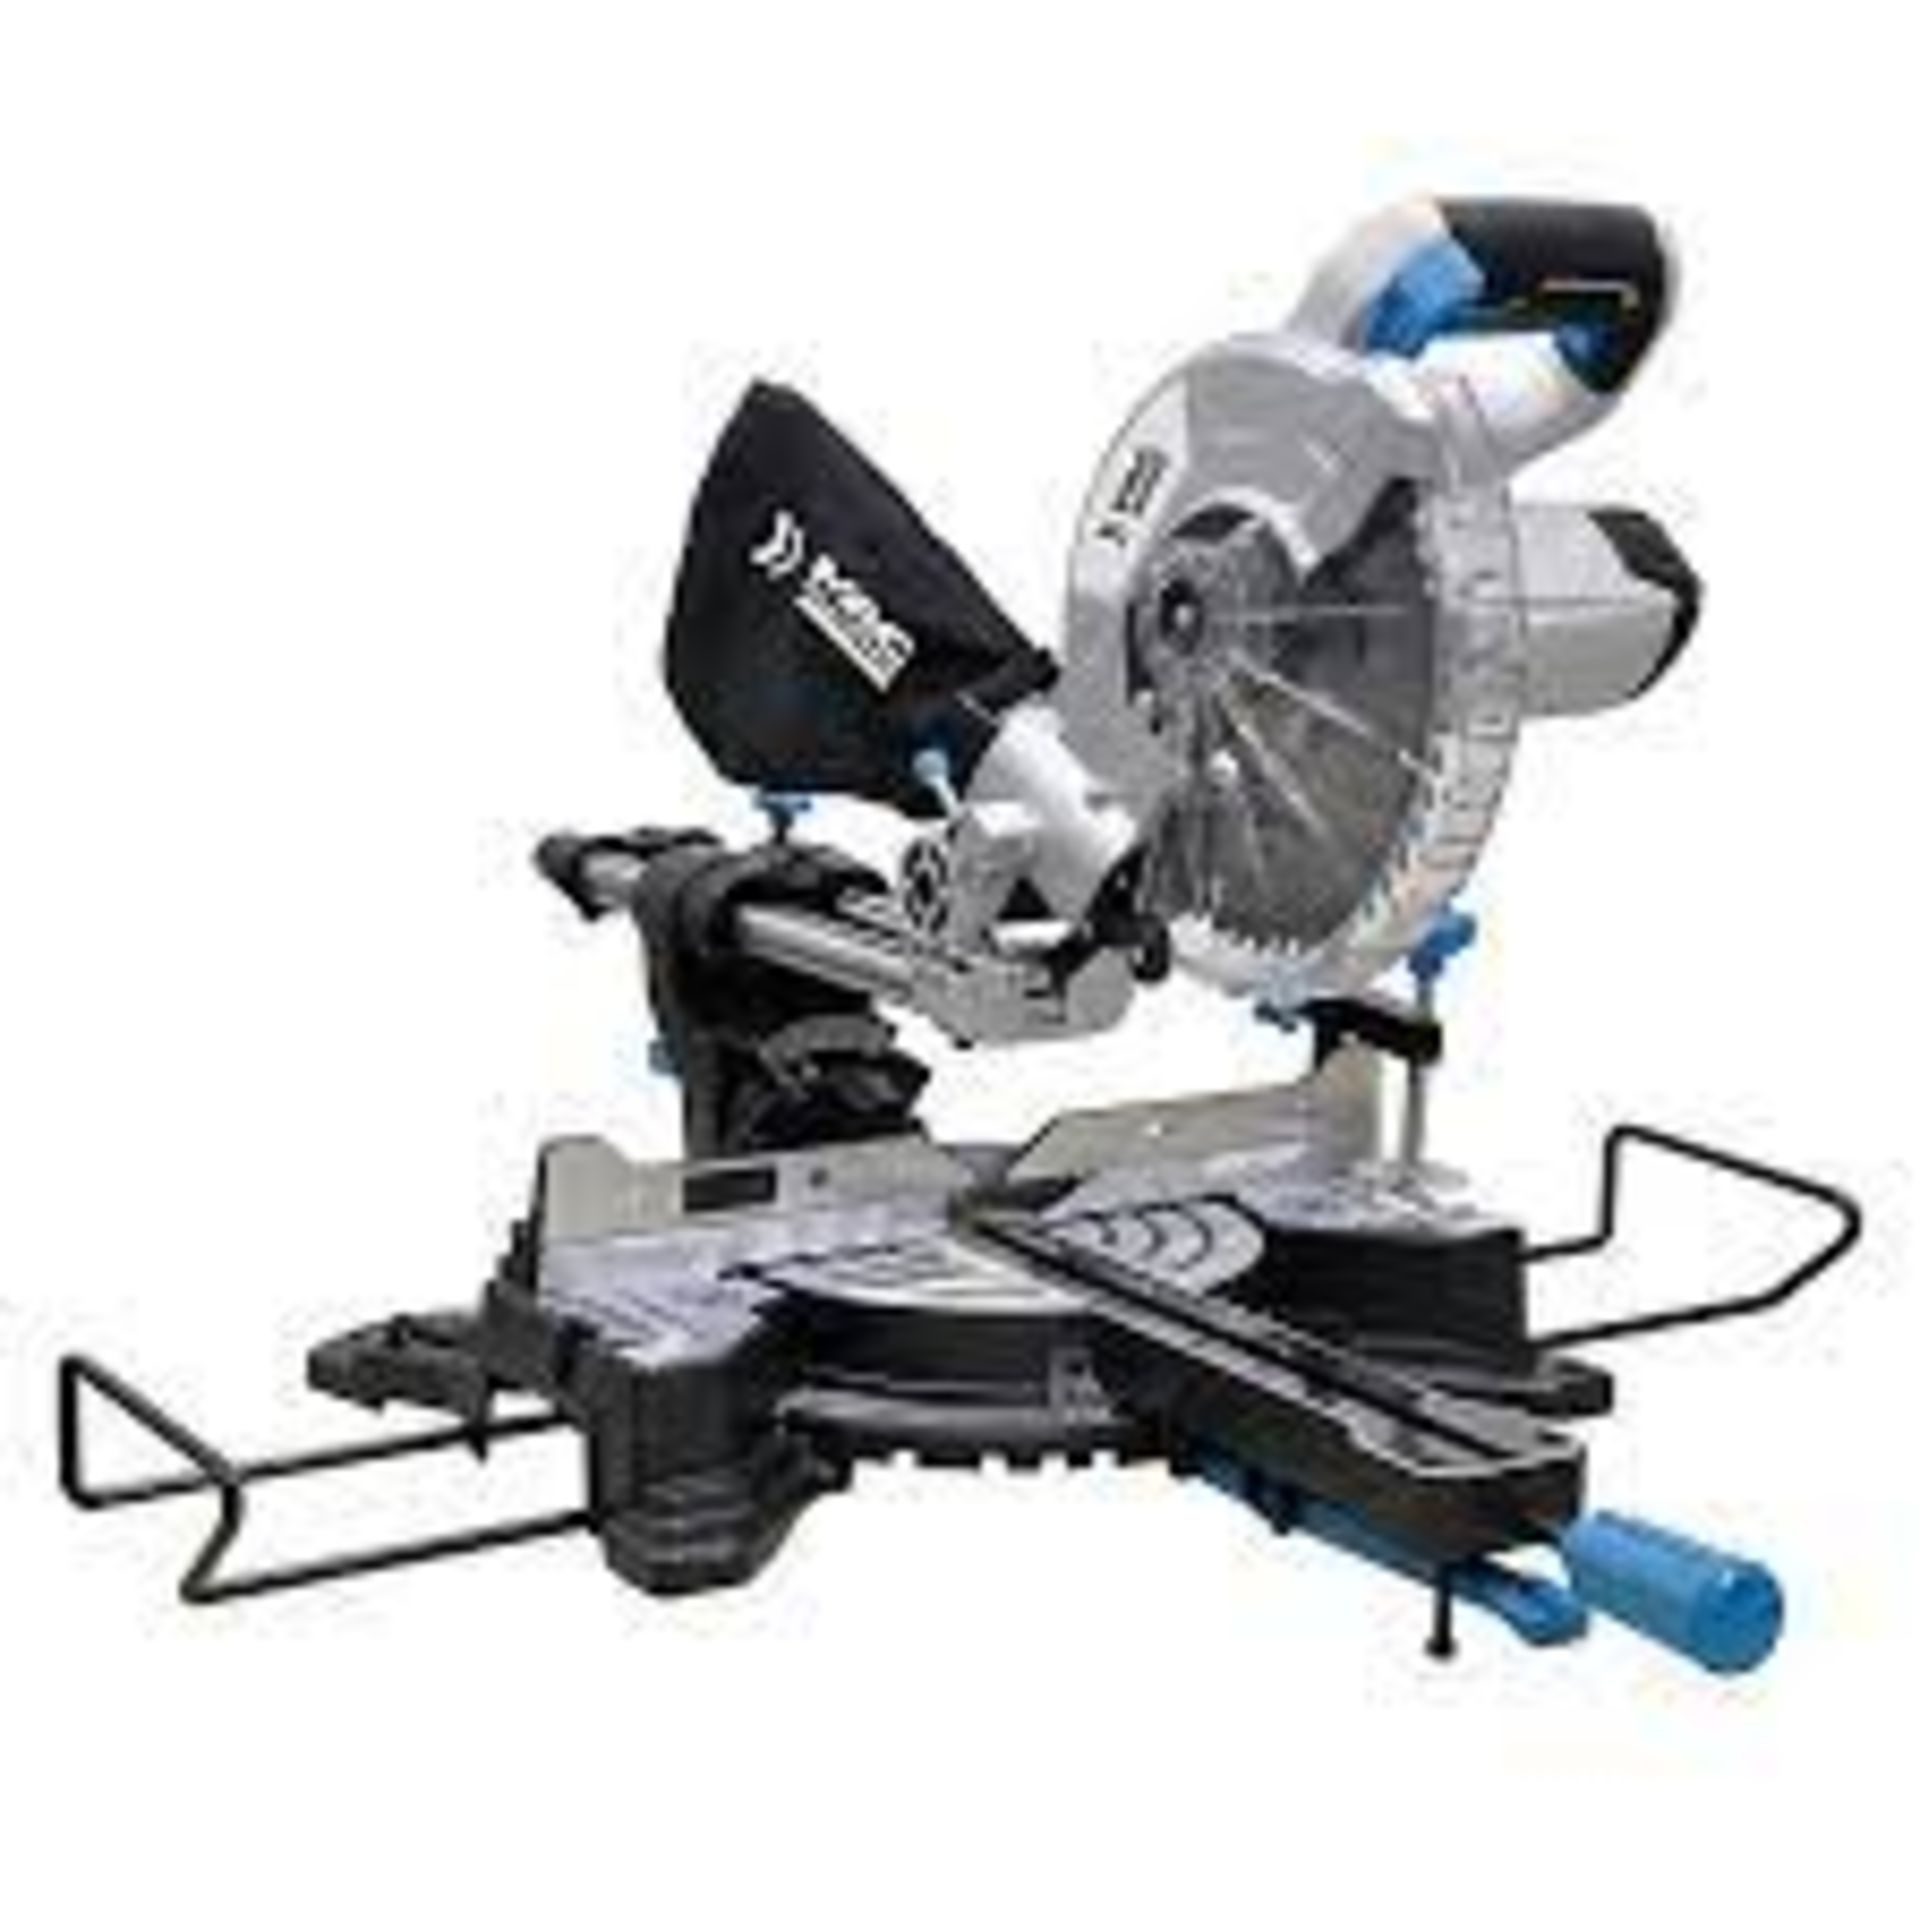 MACALLISTER 210MM 1500W 220-240V CORDED COMPOUND MITRE SAW R11-2